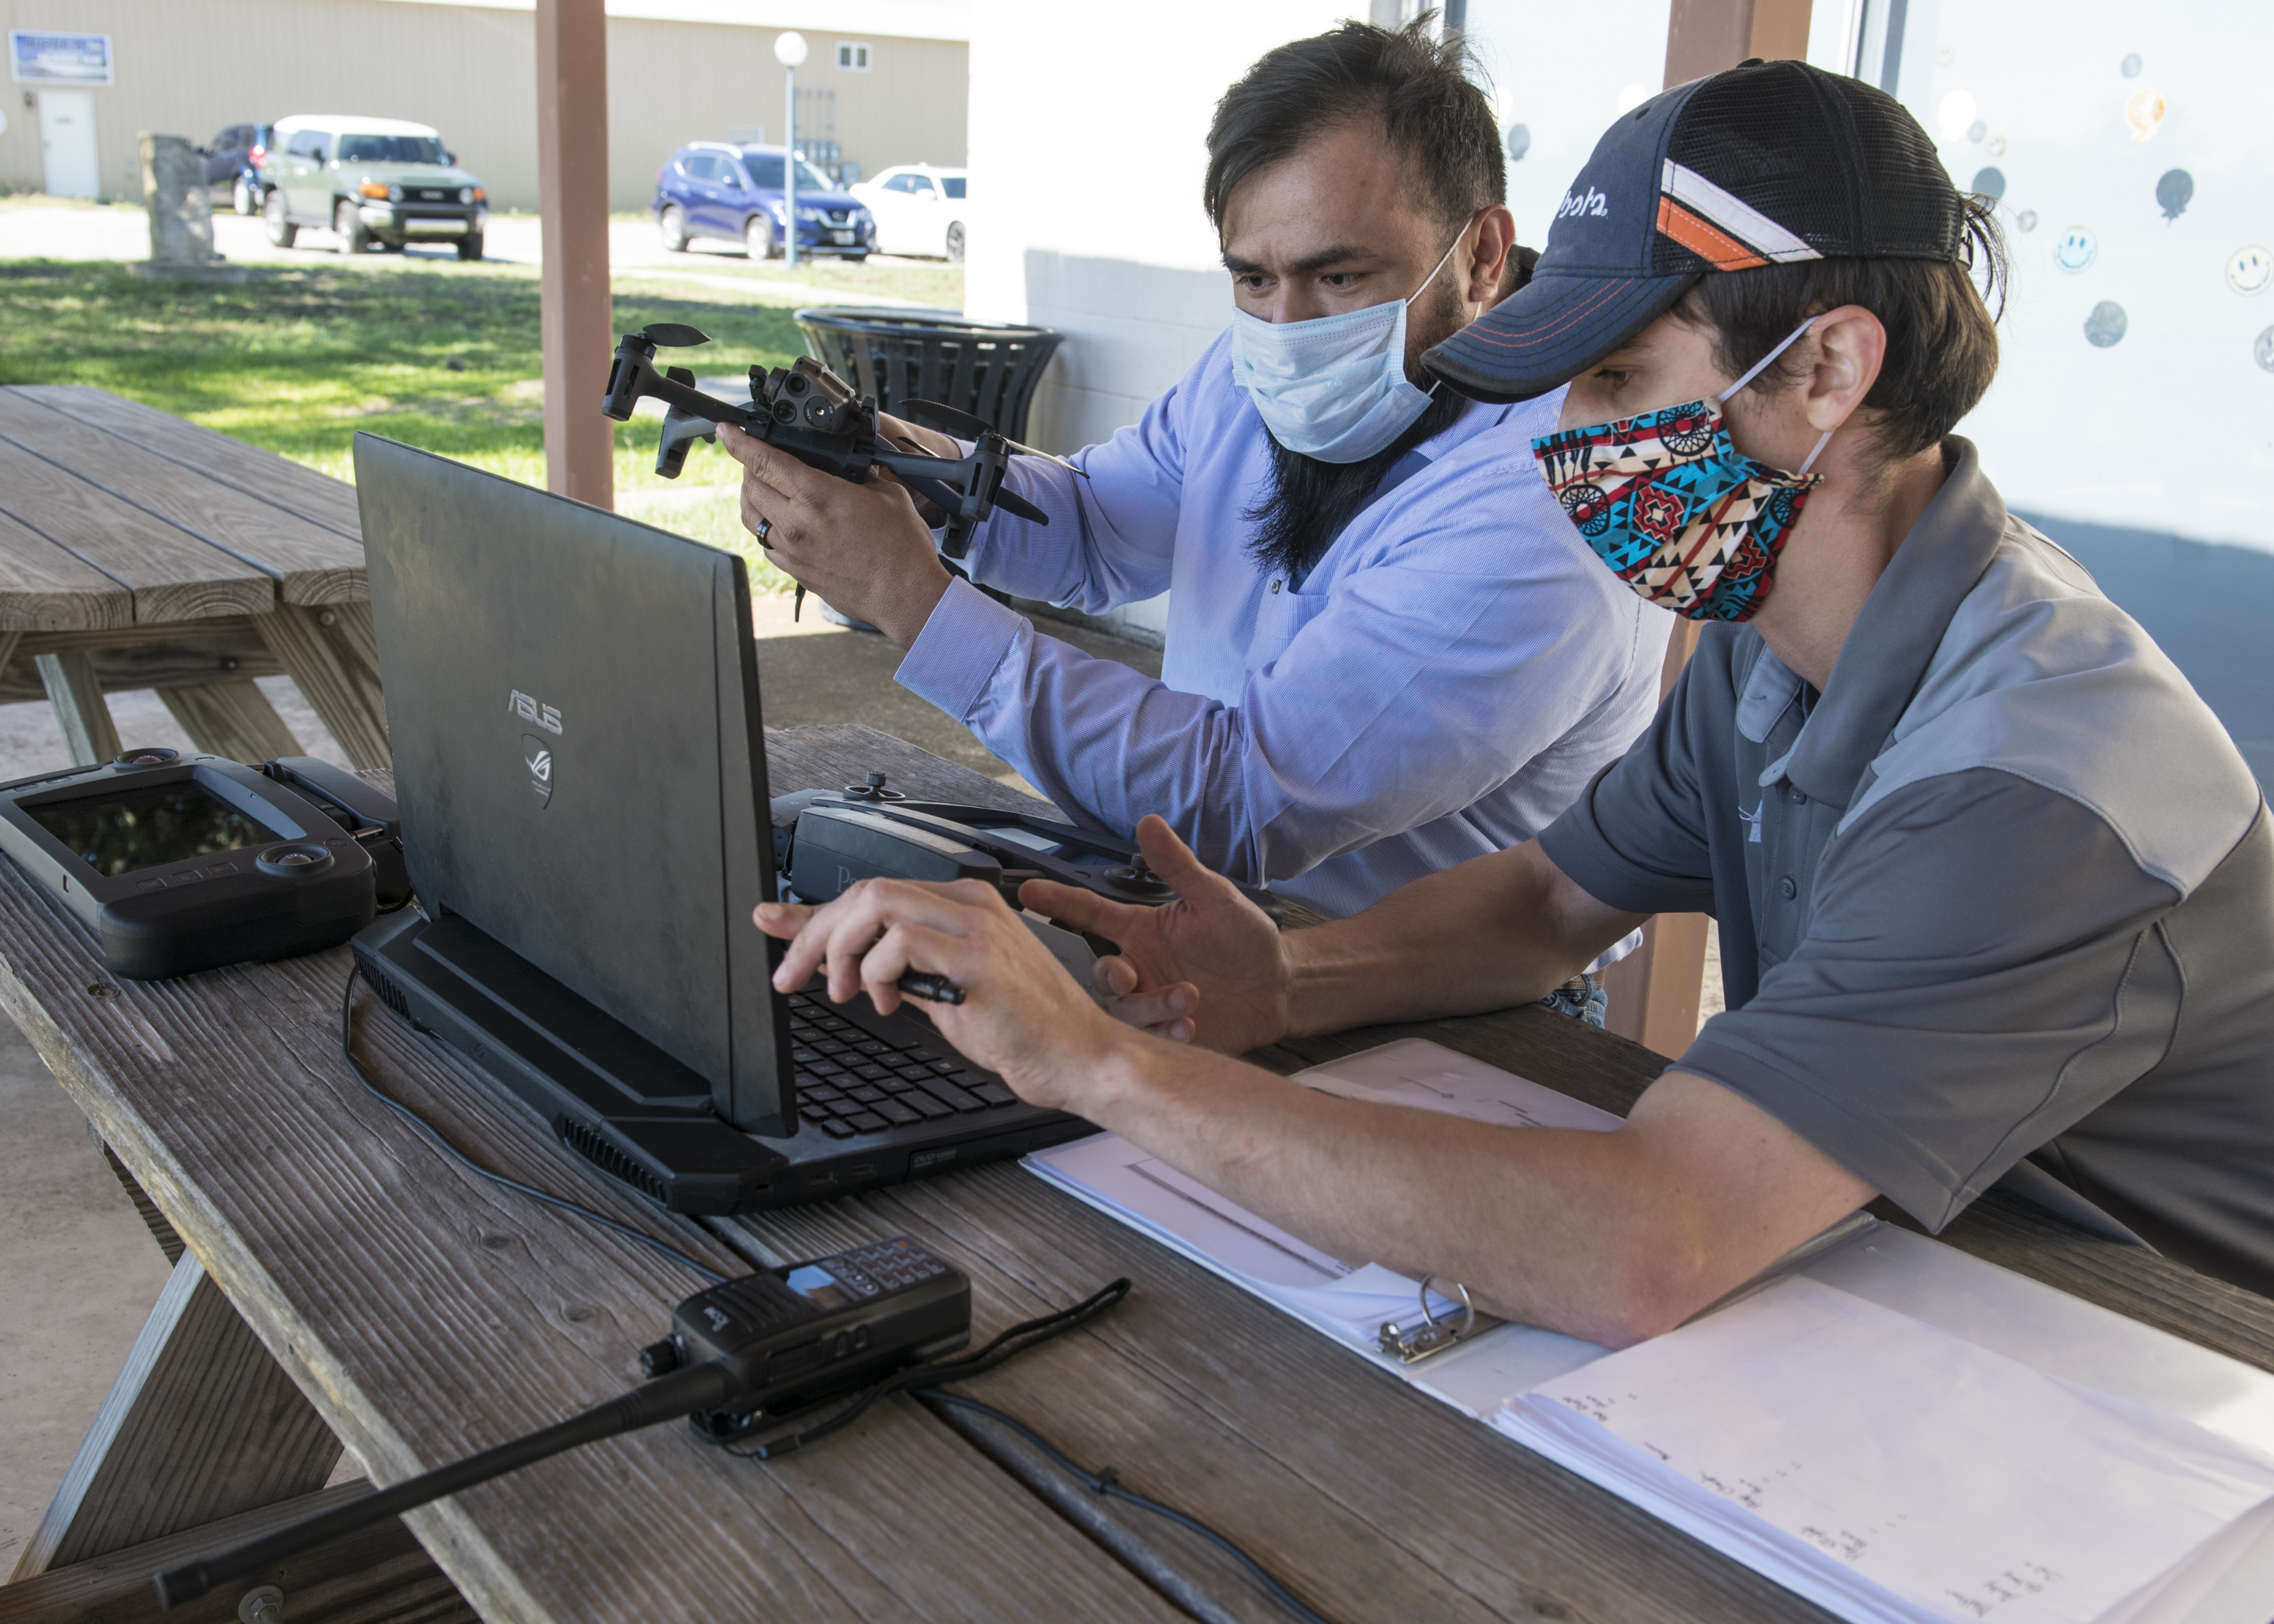 Julio Toala, Air Force Civil Engineer Center GeoBase program geospatial operations manager, receives training from Joseph Campbell, Emerging Technologies Institute chief technology officer and lead instructor, on drone pre-flight checks at San Geronimo Air Park, Texas, May 7, 2021. The training focused on pre- and post-flight checks, projecting flight patterns and 3D mapping using images from the drone. The Air Force GeoBase mission is to create and exploit geospatial information and services to optimize agile combat support and minimize operational risk.